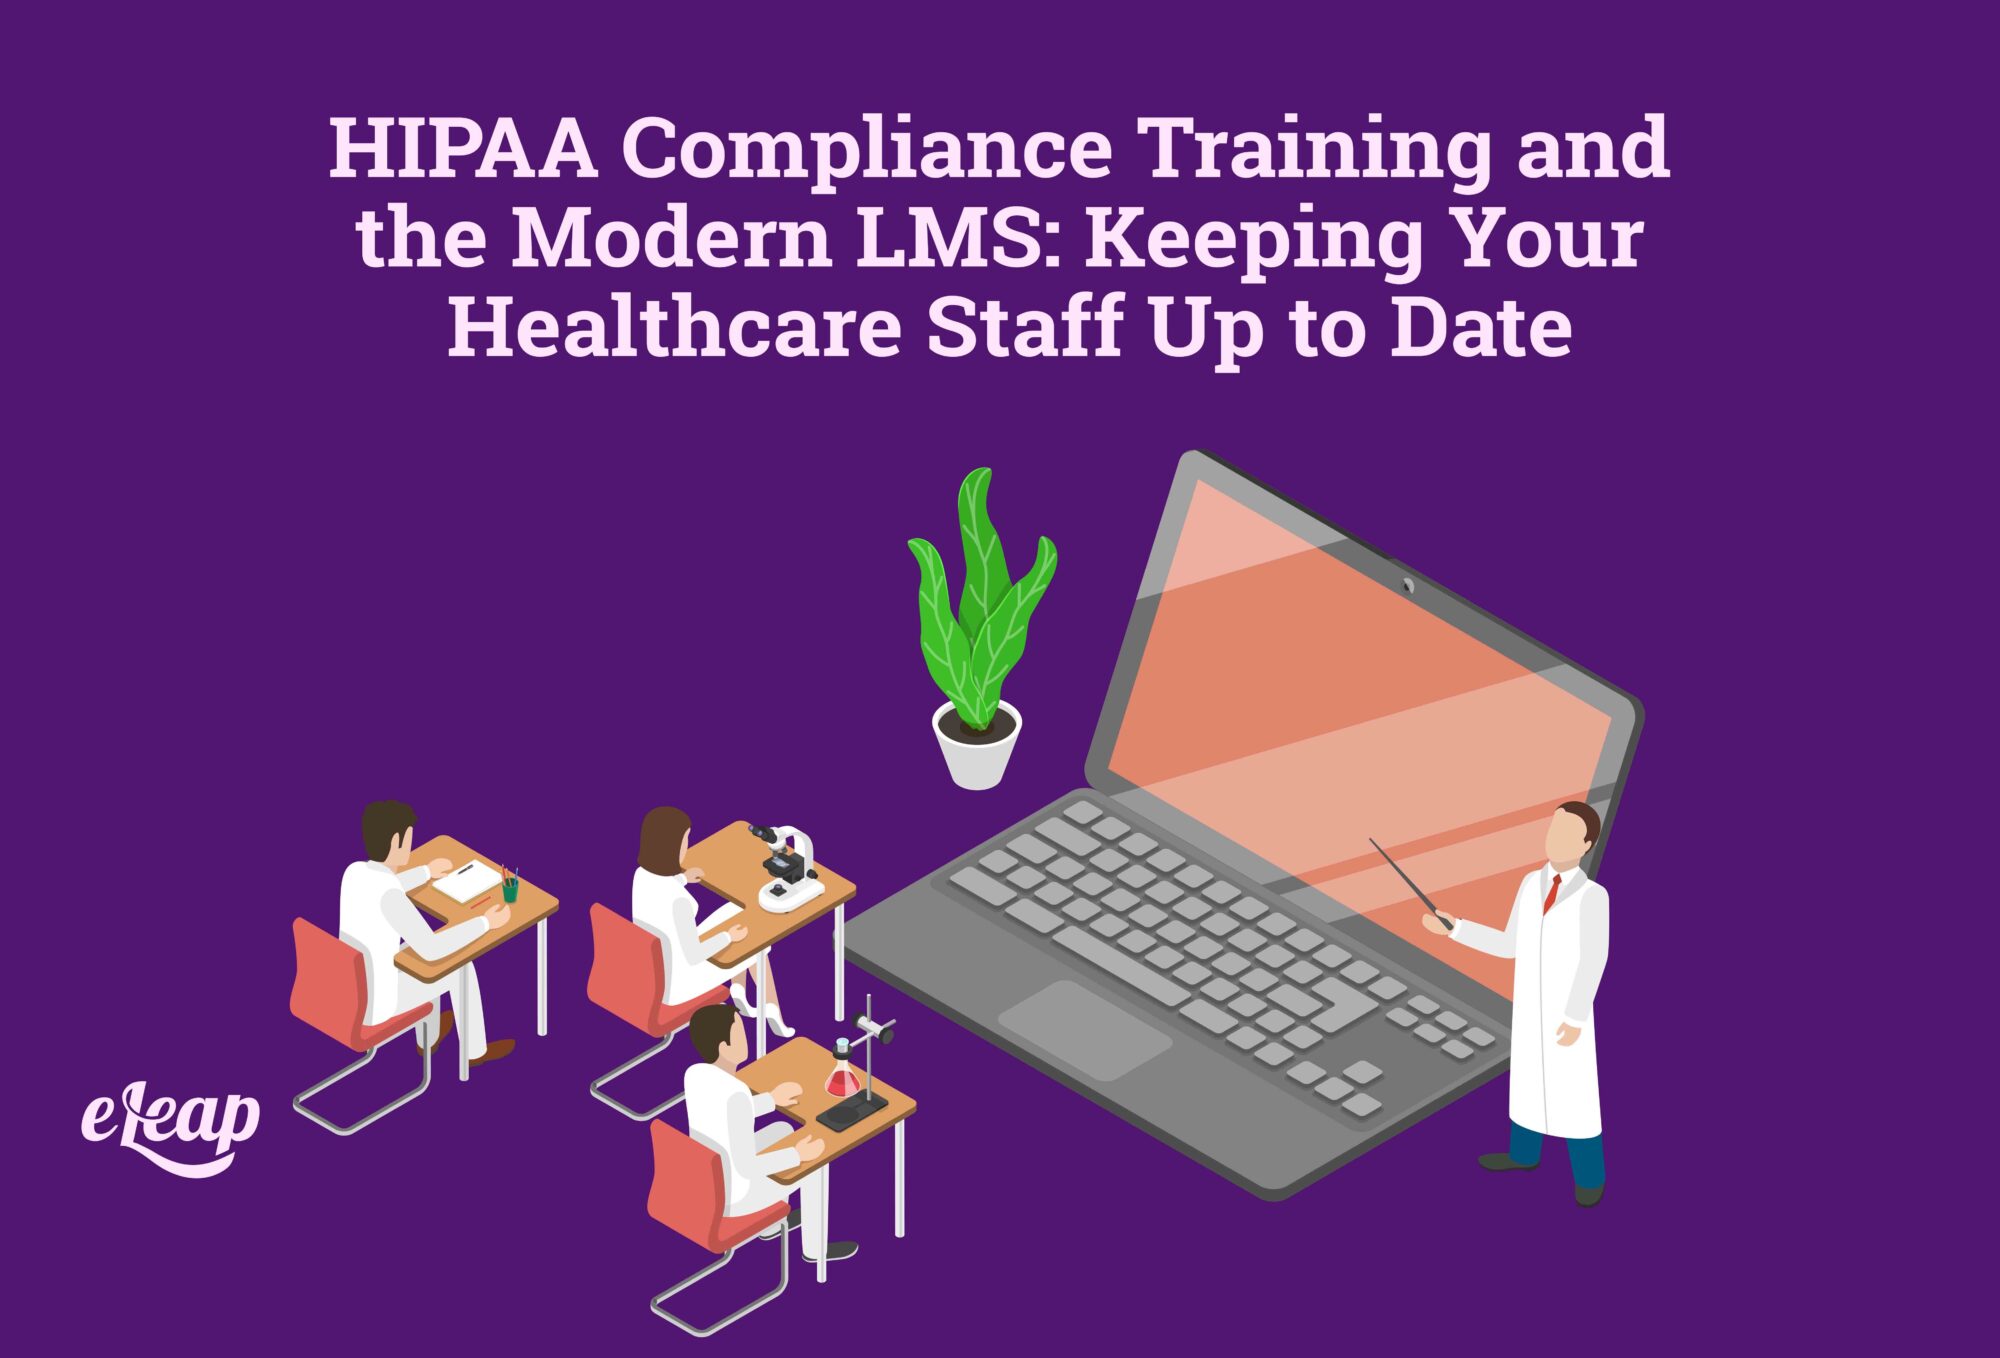 HIPAA Compliance Training and the Modern LMS: Keeping Your Healthcare Staff Up to Date